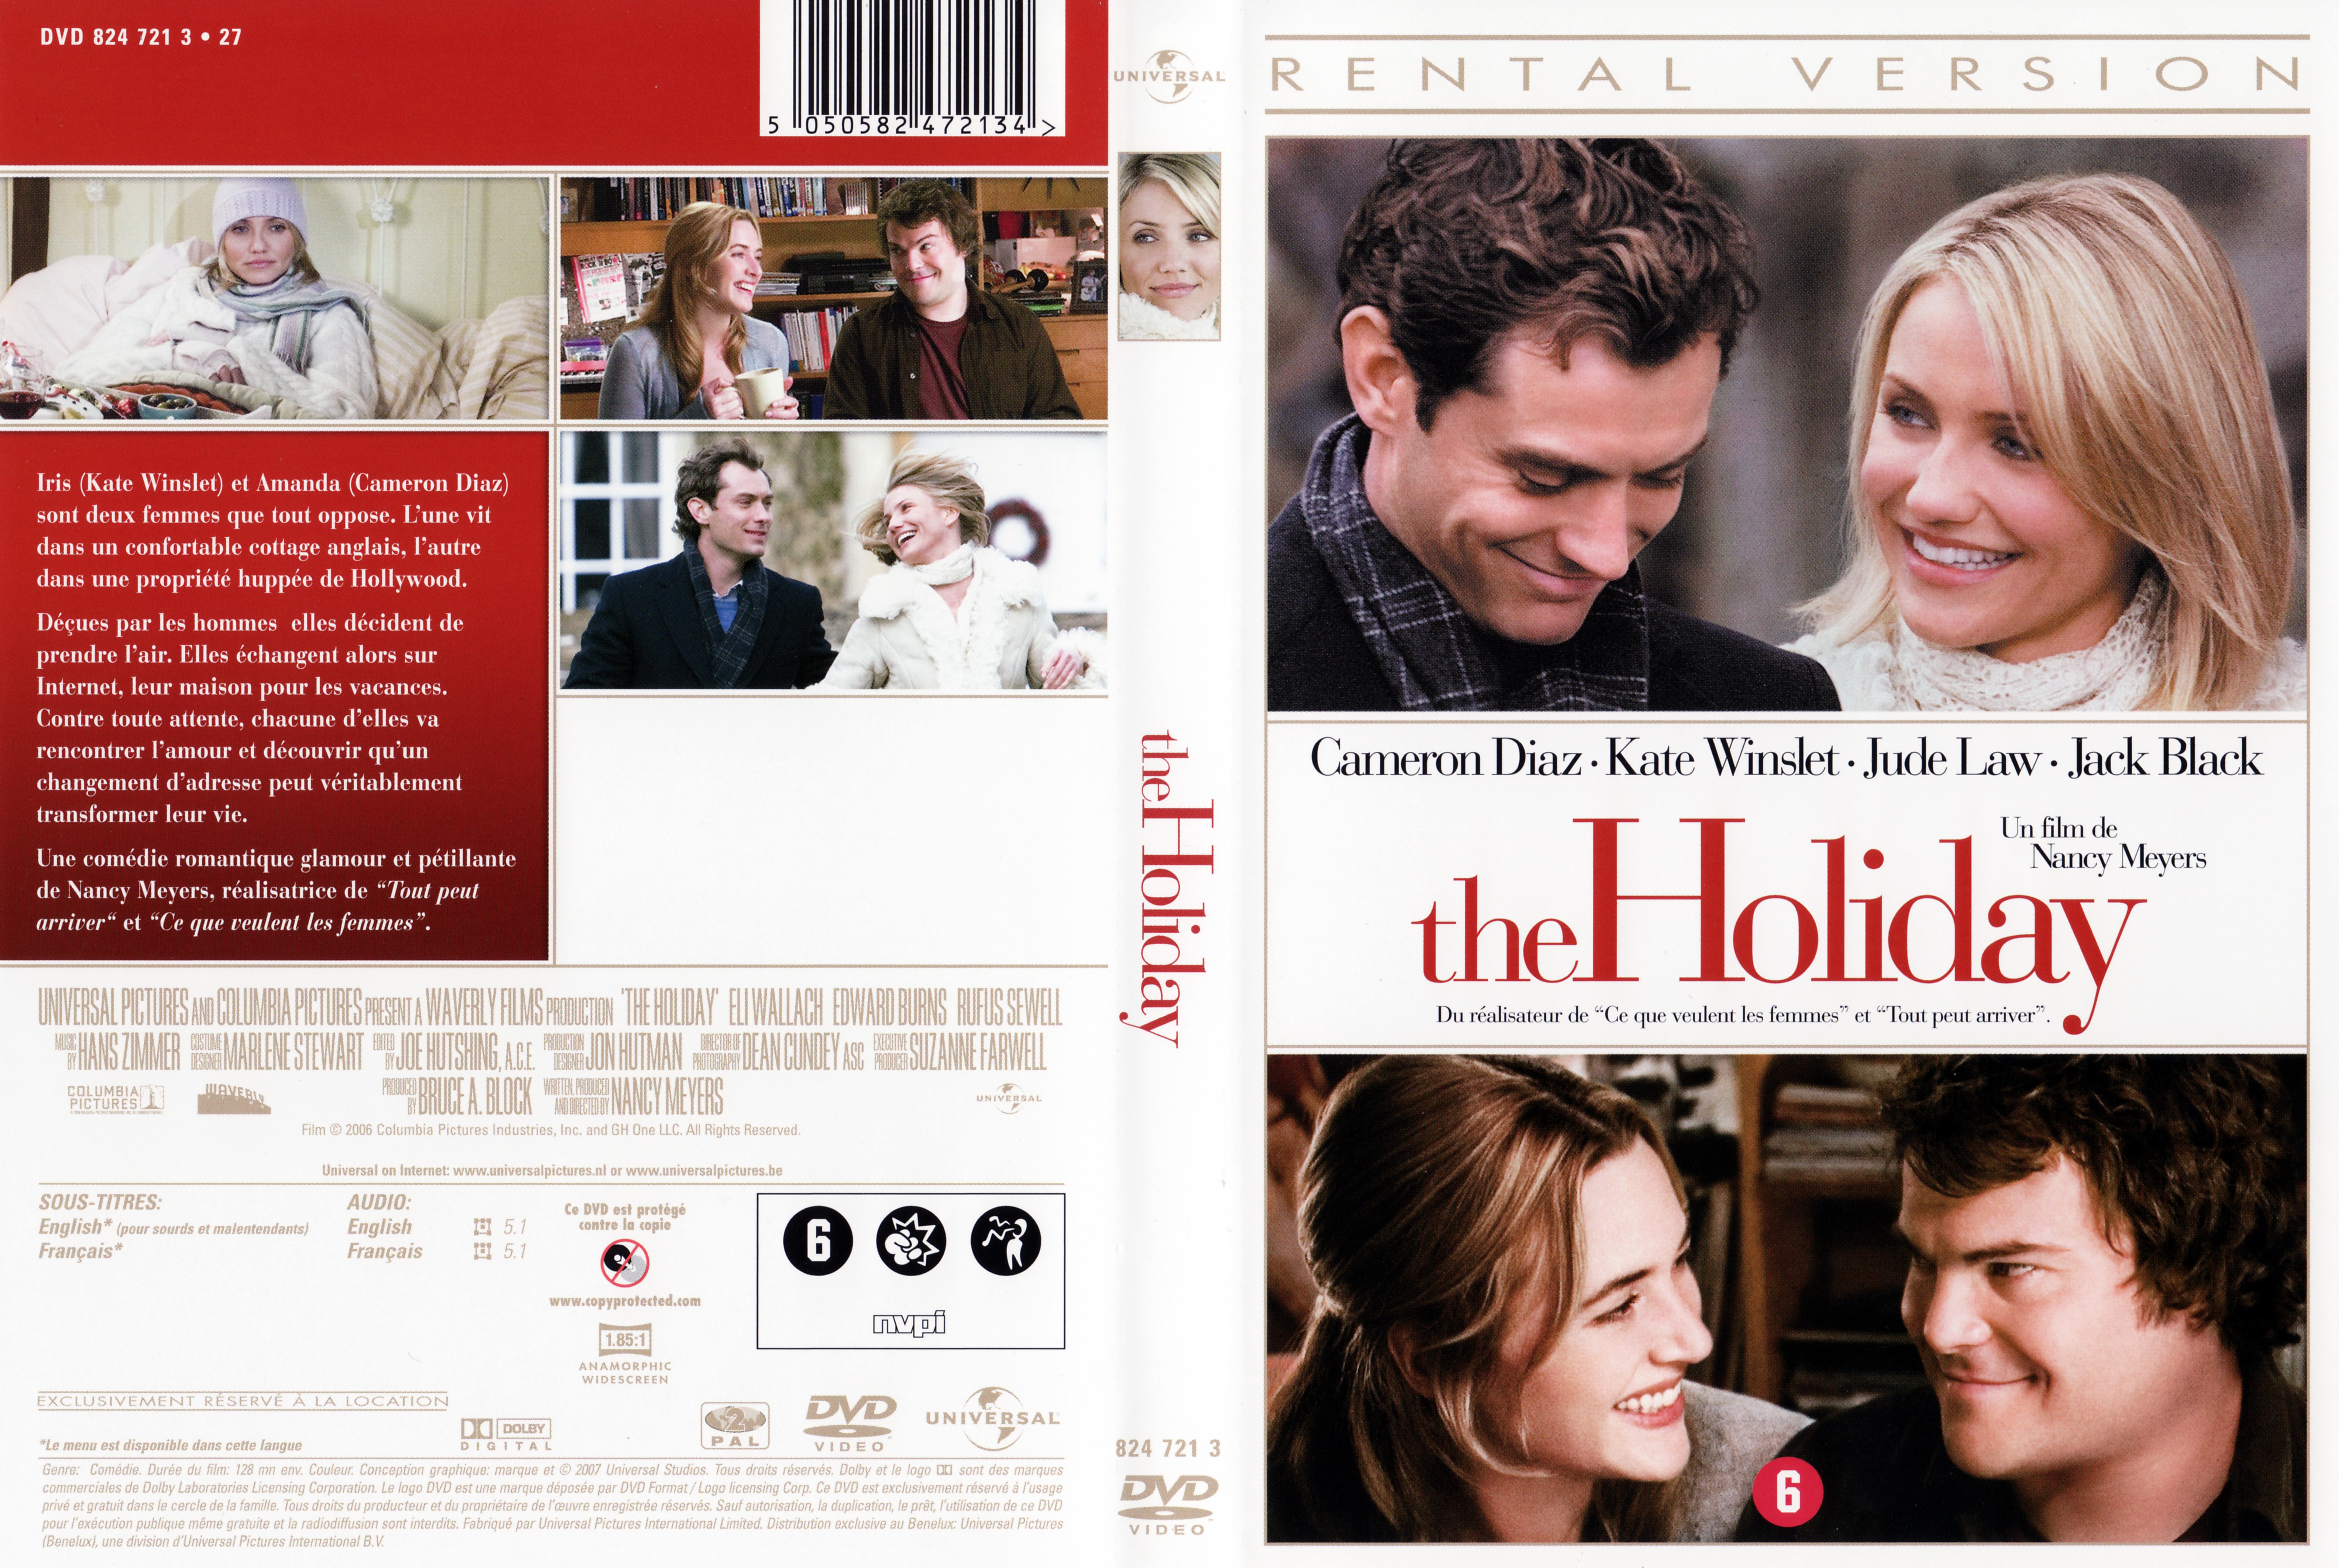 Jaquette DVD The holiday